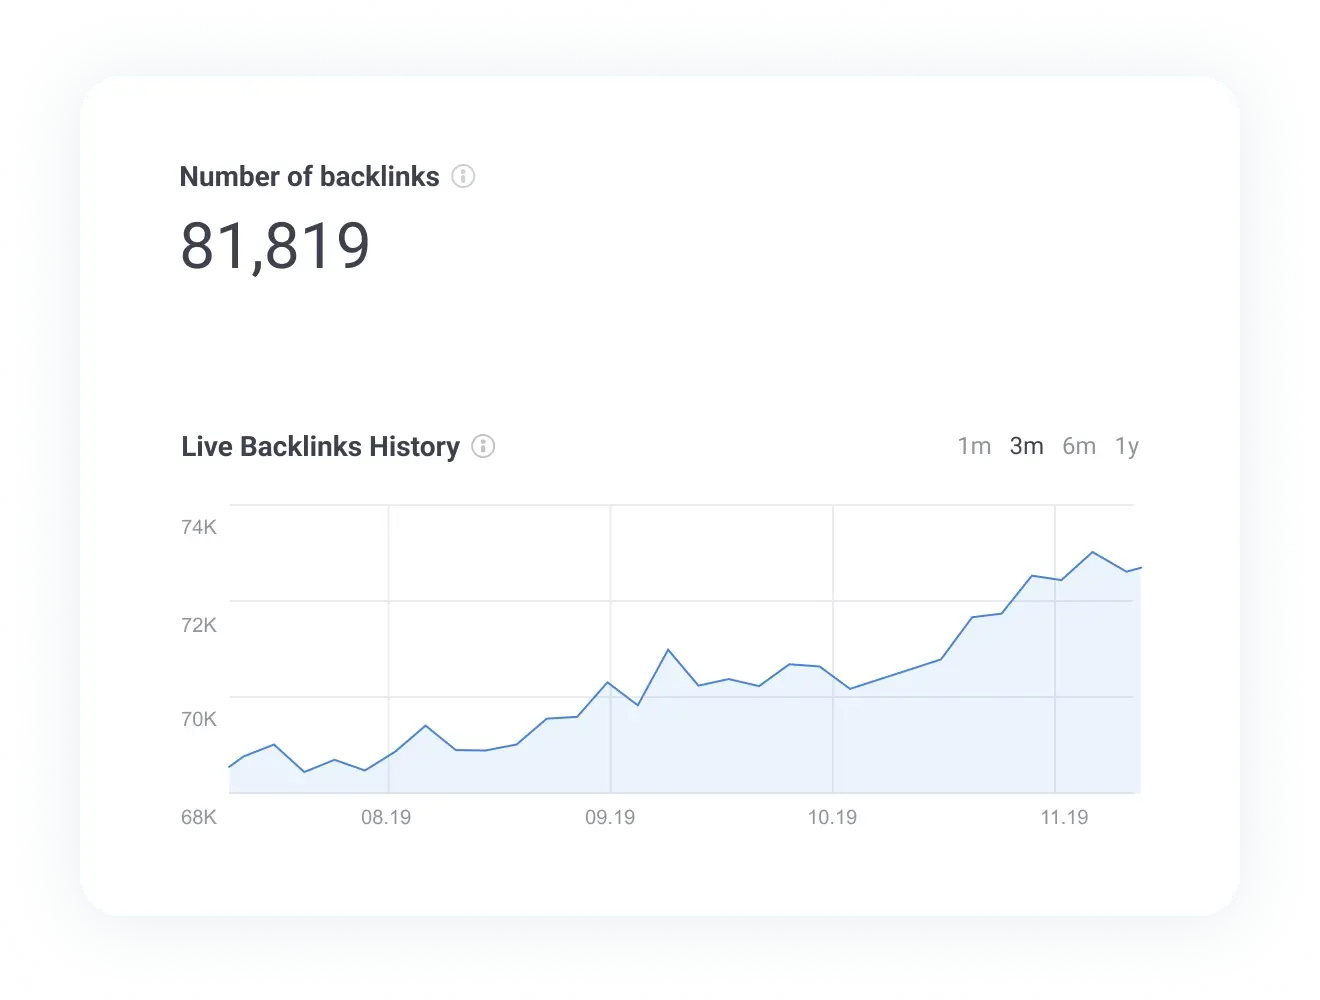 See the chart of live backlinks history